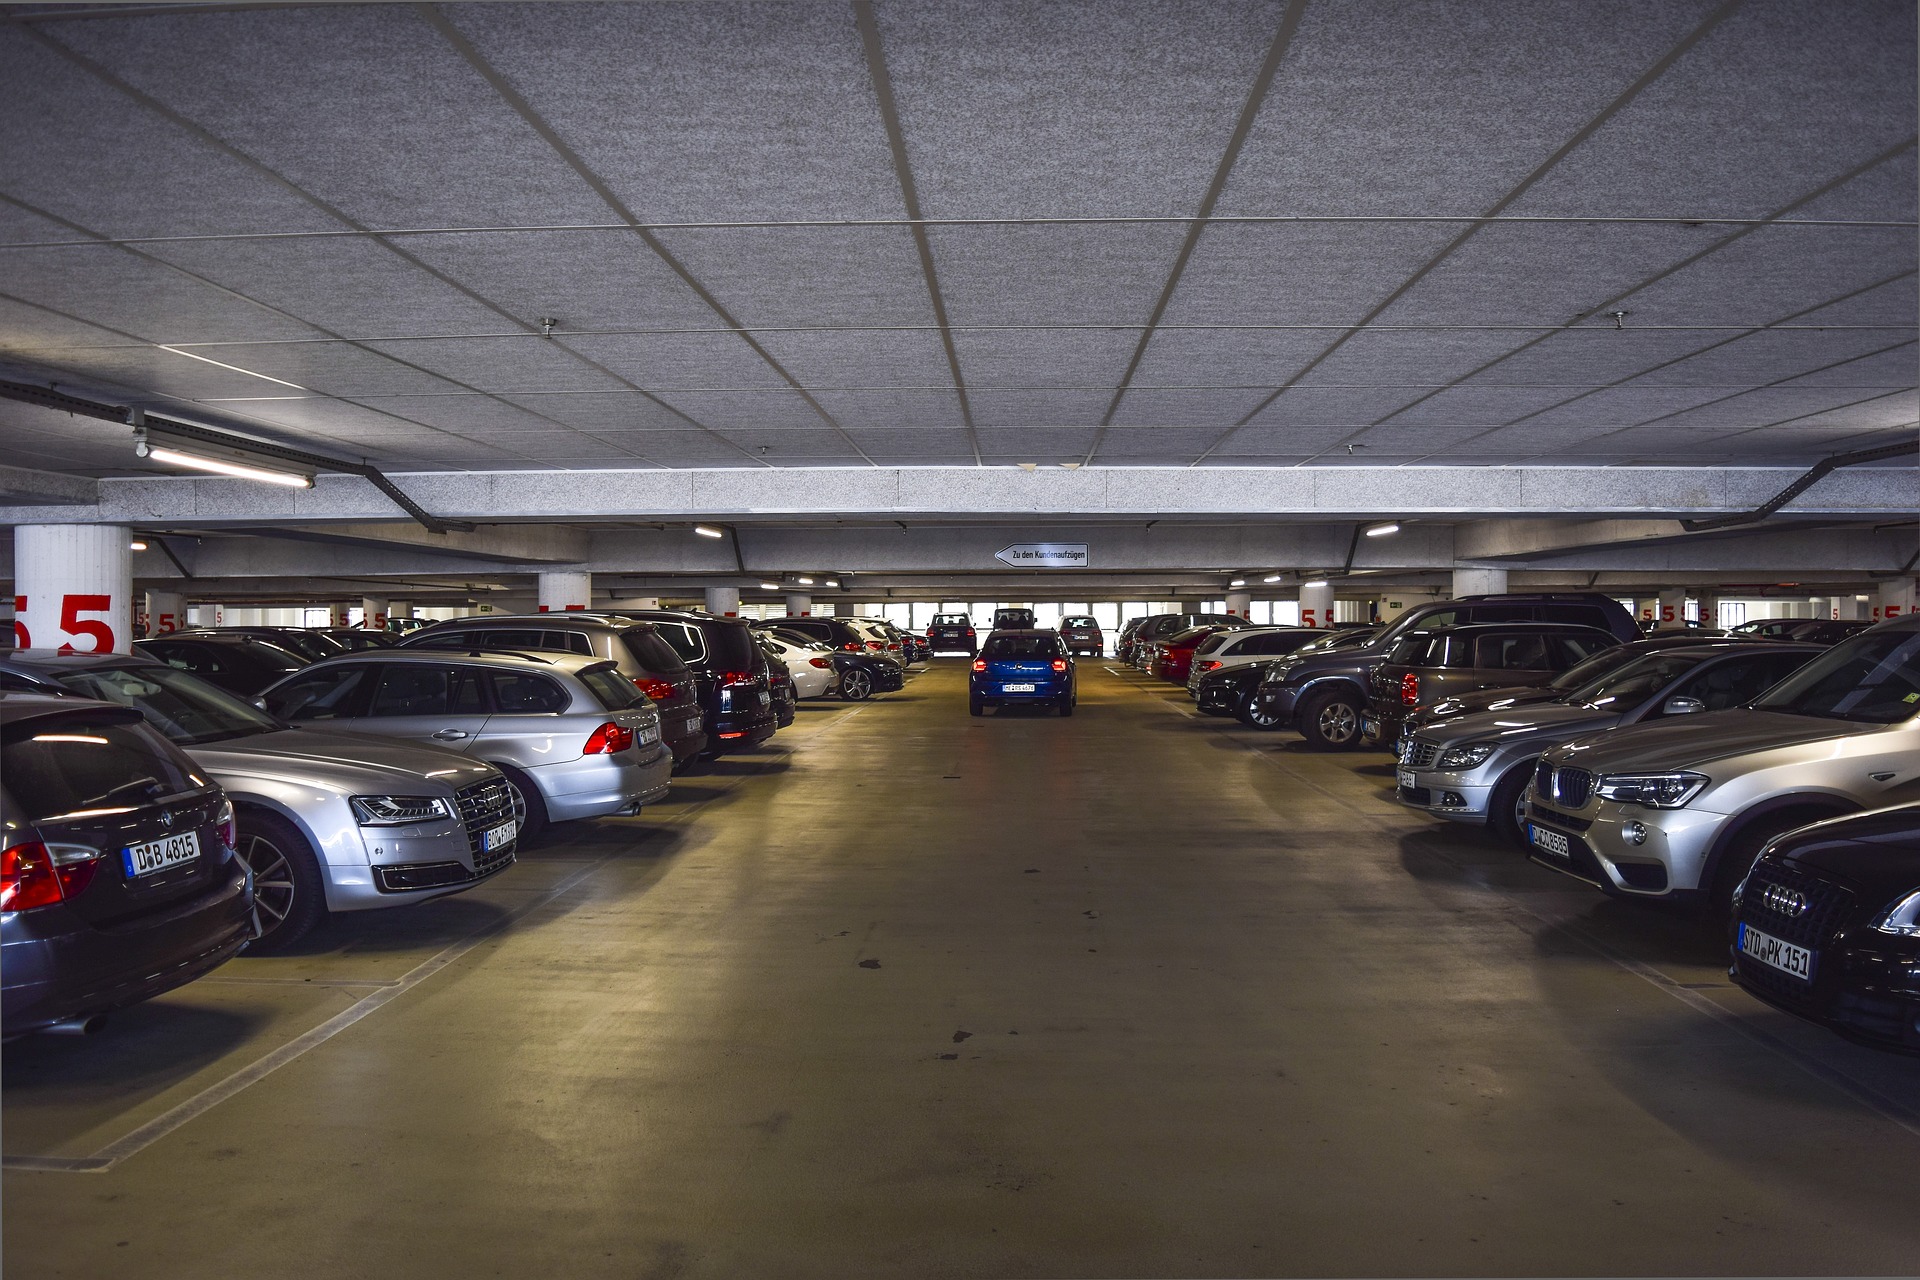 How to Comply with NYC Local Law 126 Parking Garage Inspection Rules-4376923_1920